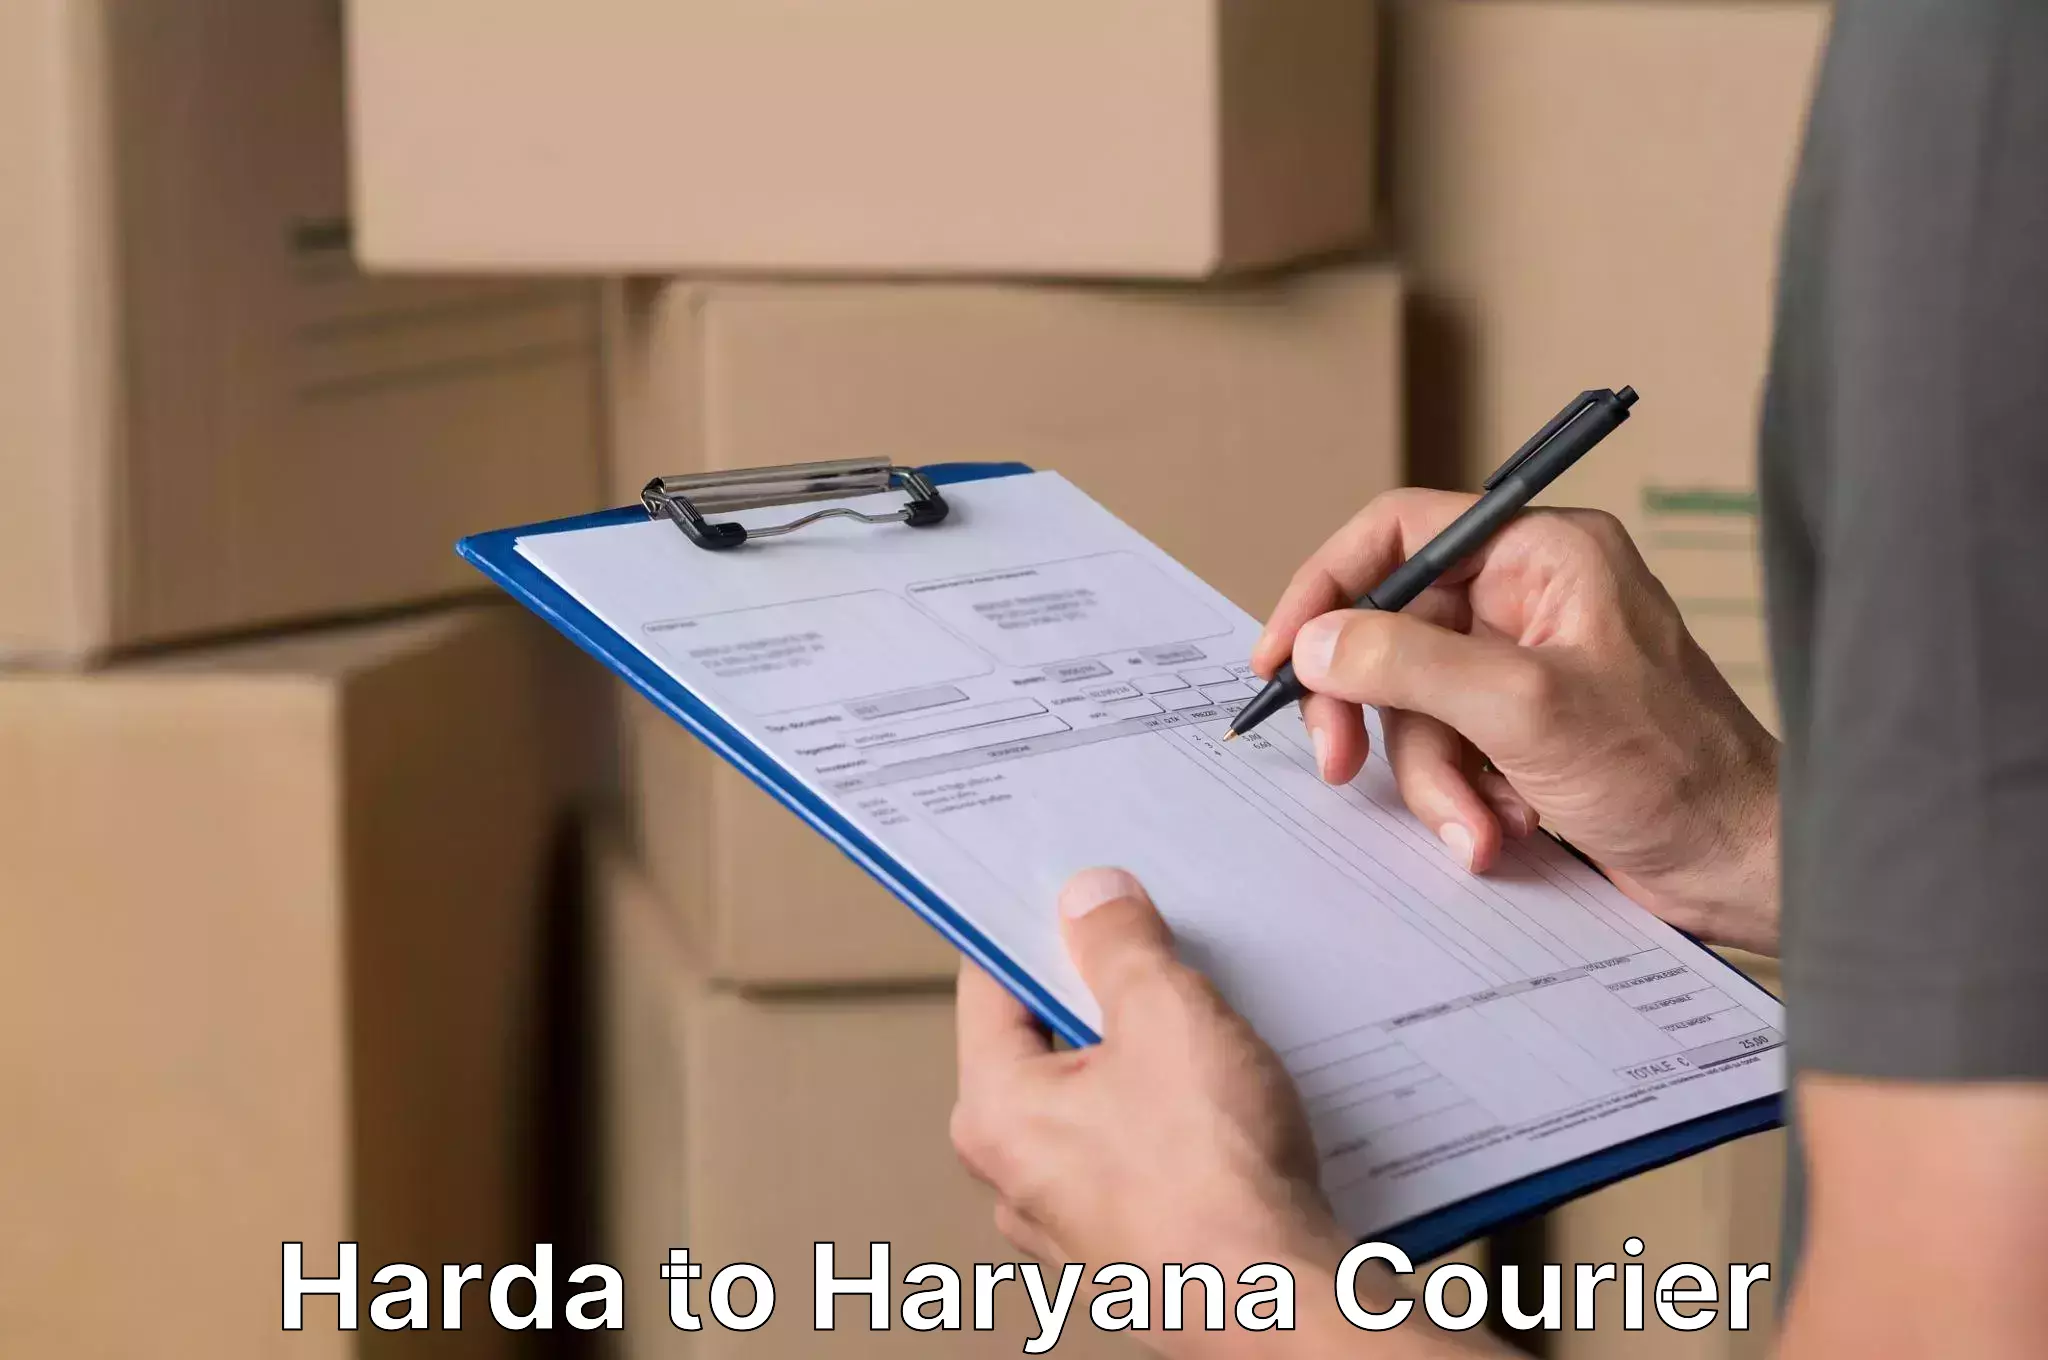 Efficient relocation services in Harda to Kaithal